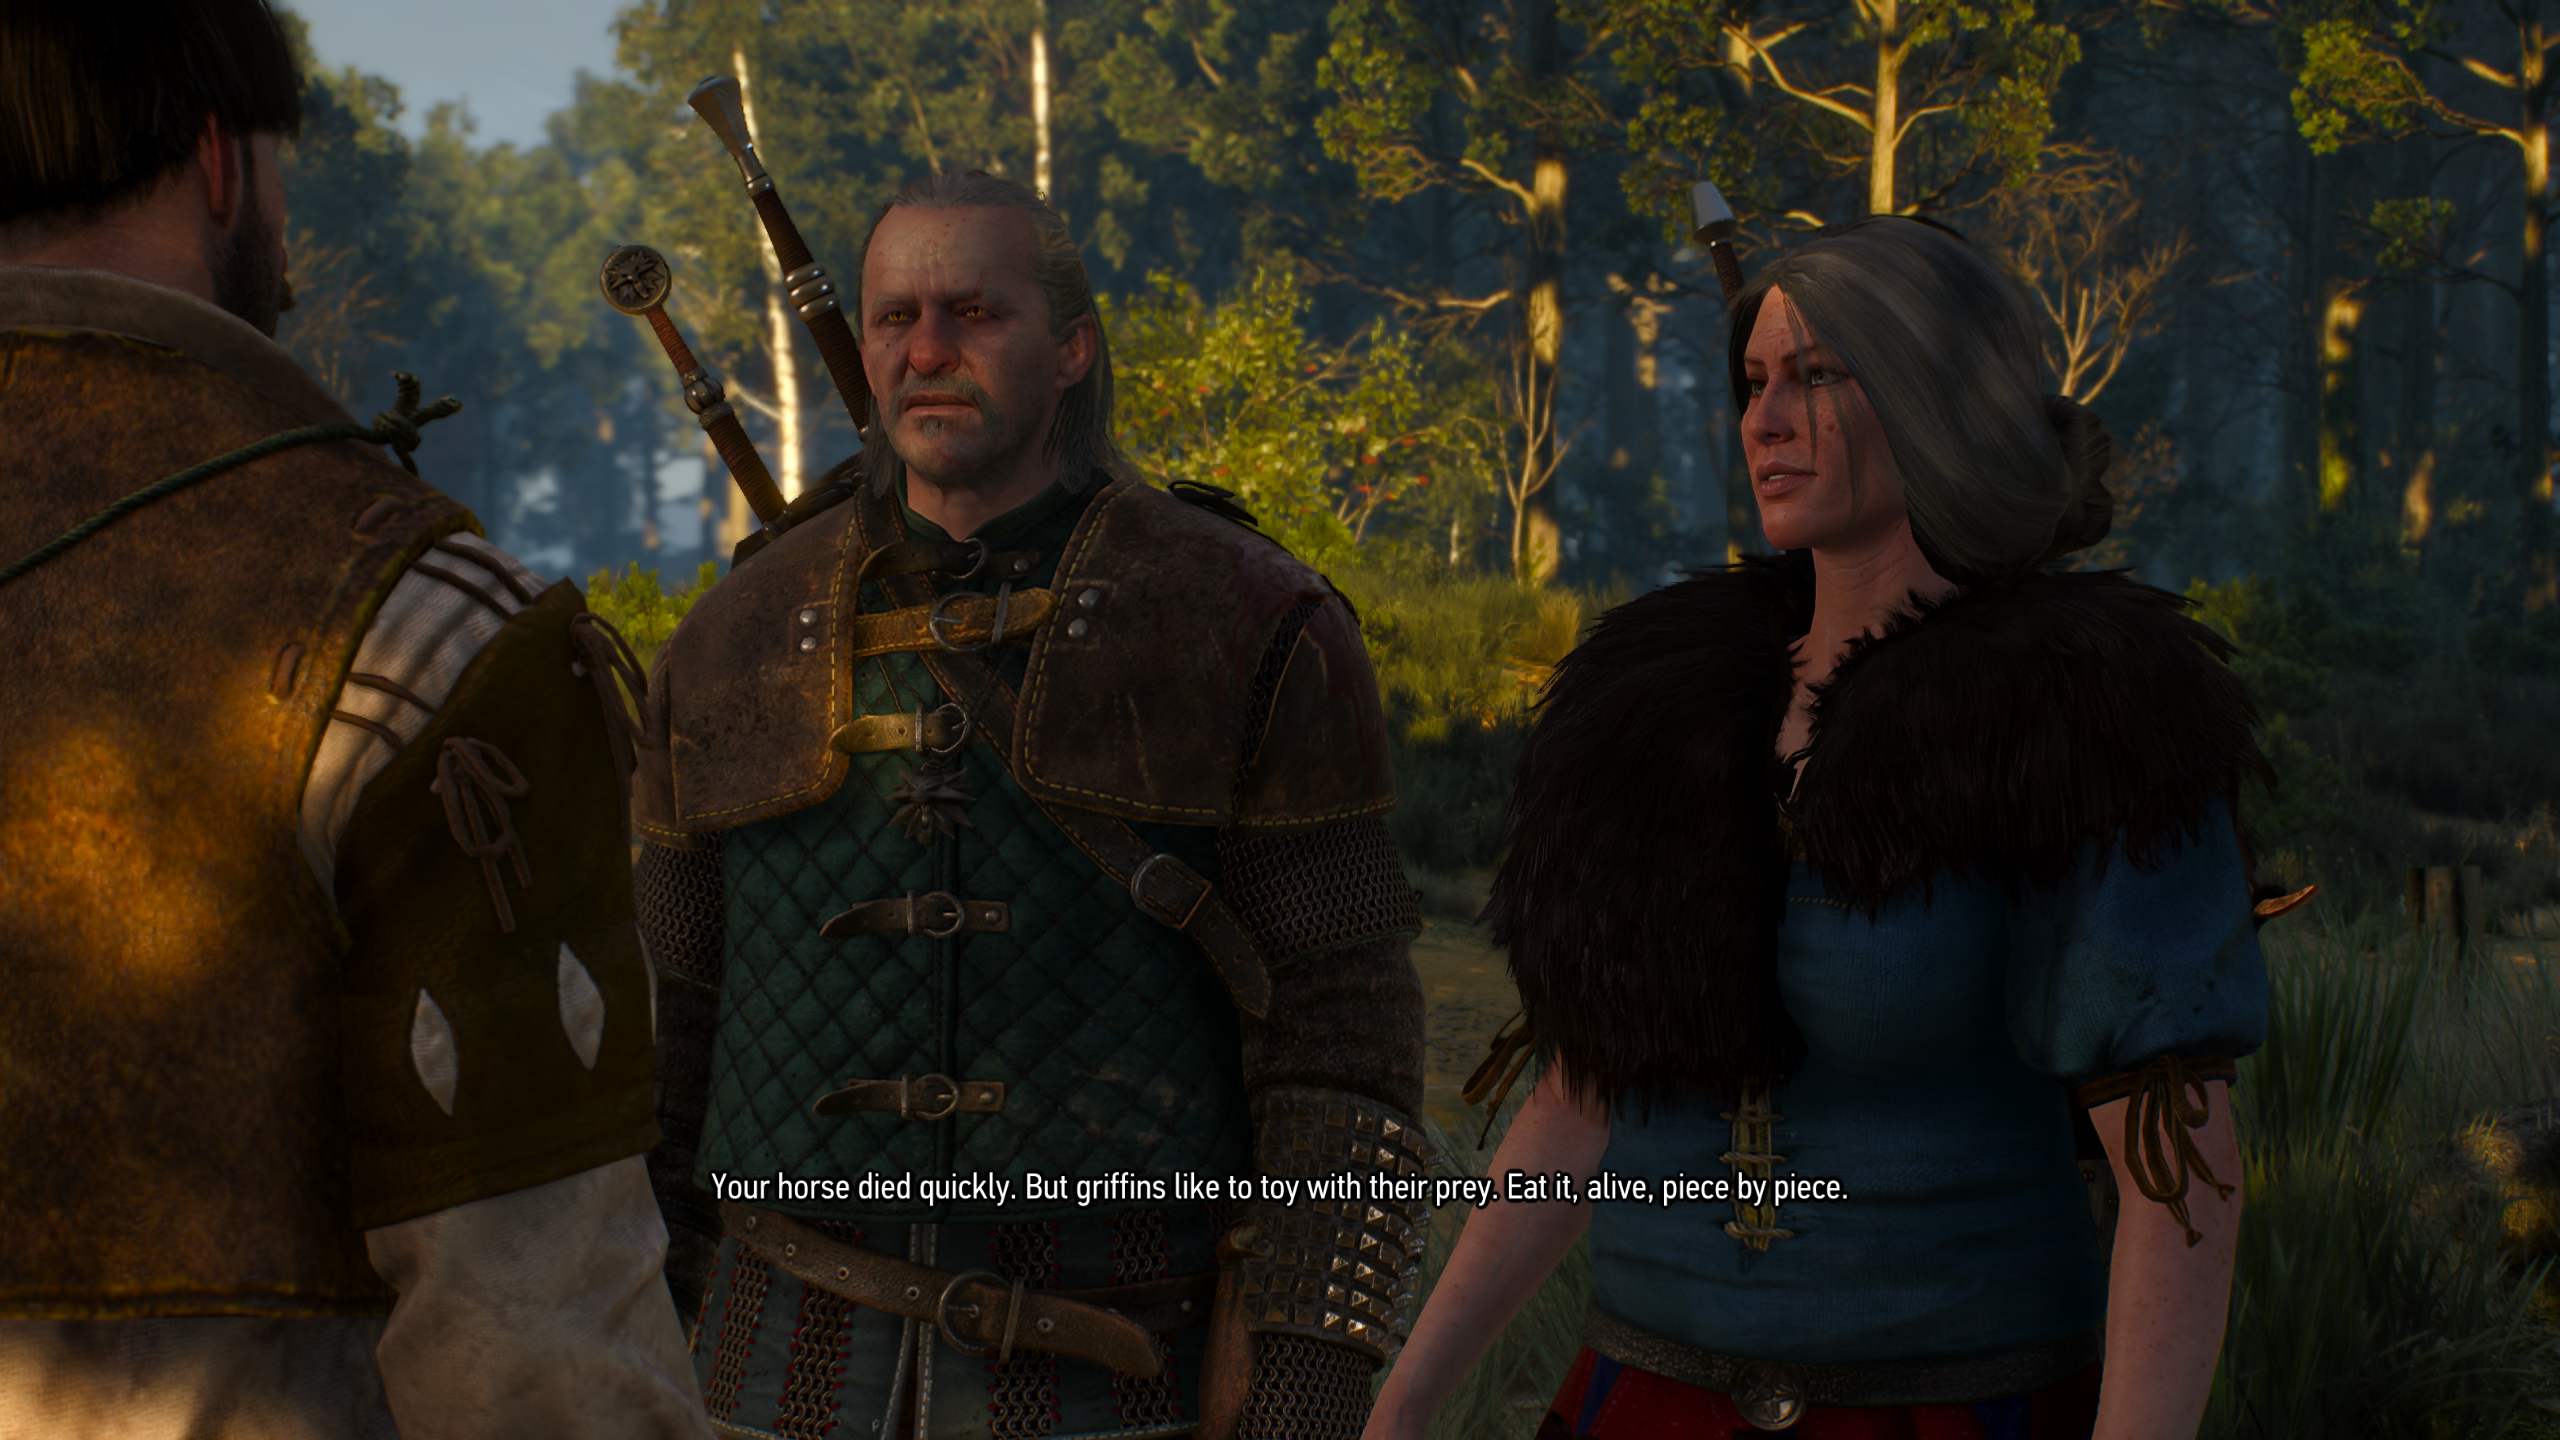 Witcher 3 custom character mod